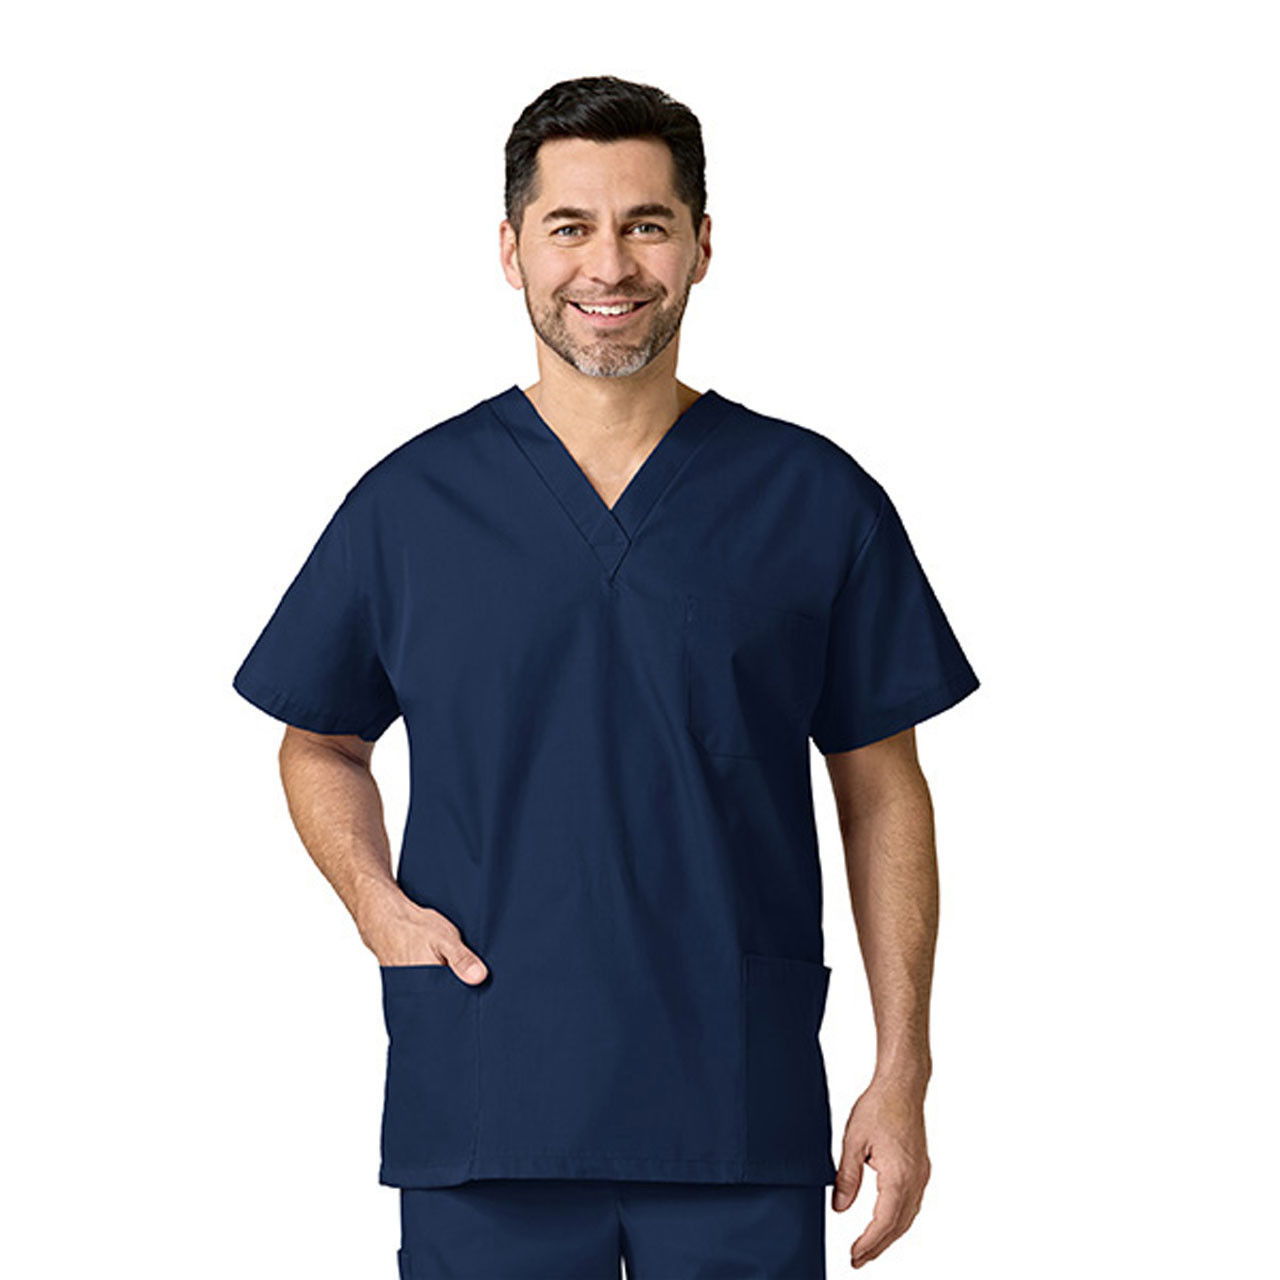 Does the Navy Blue Scrub Top have a v-neck?